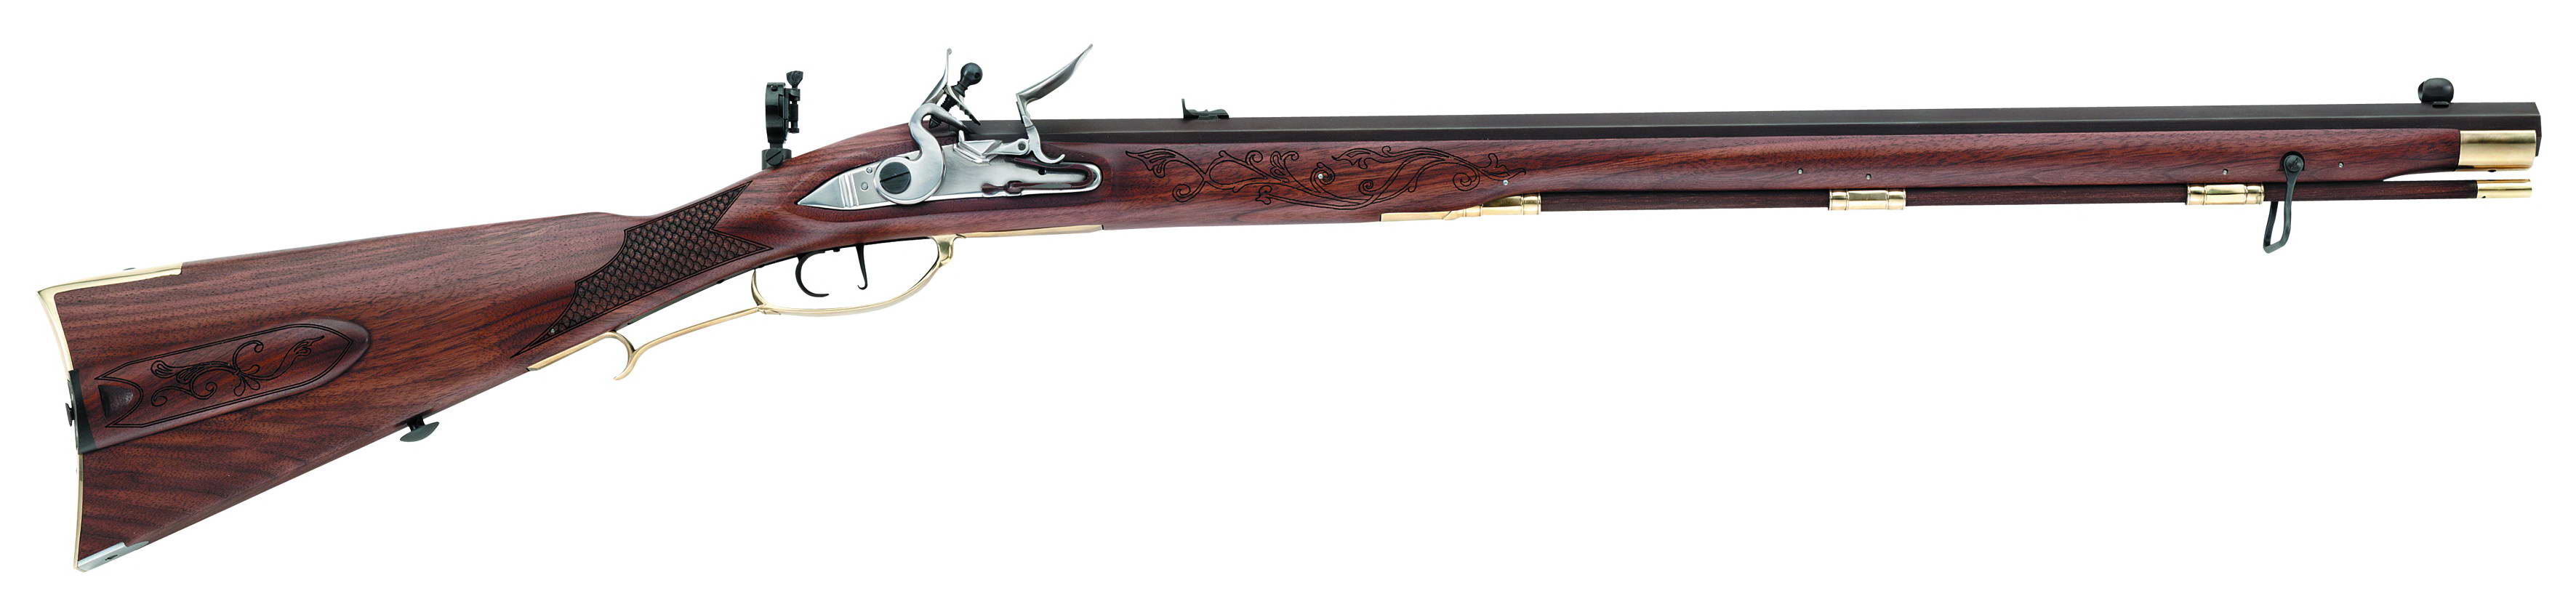 Nice Images Collection: Harper's Ferry Model 1803 Rifle Desktop Wallpapers